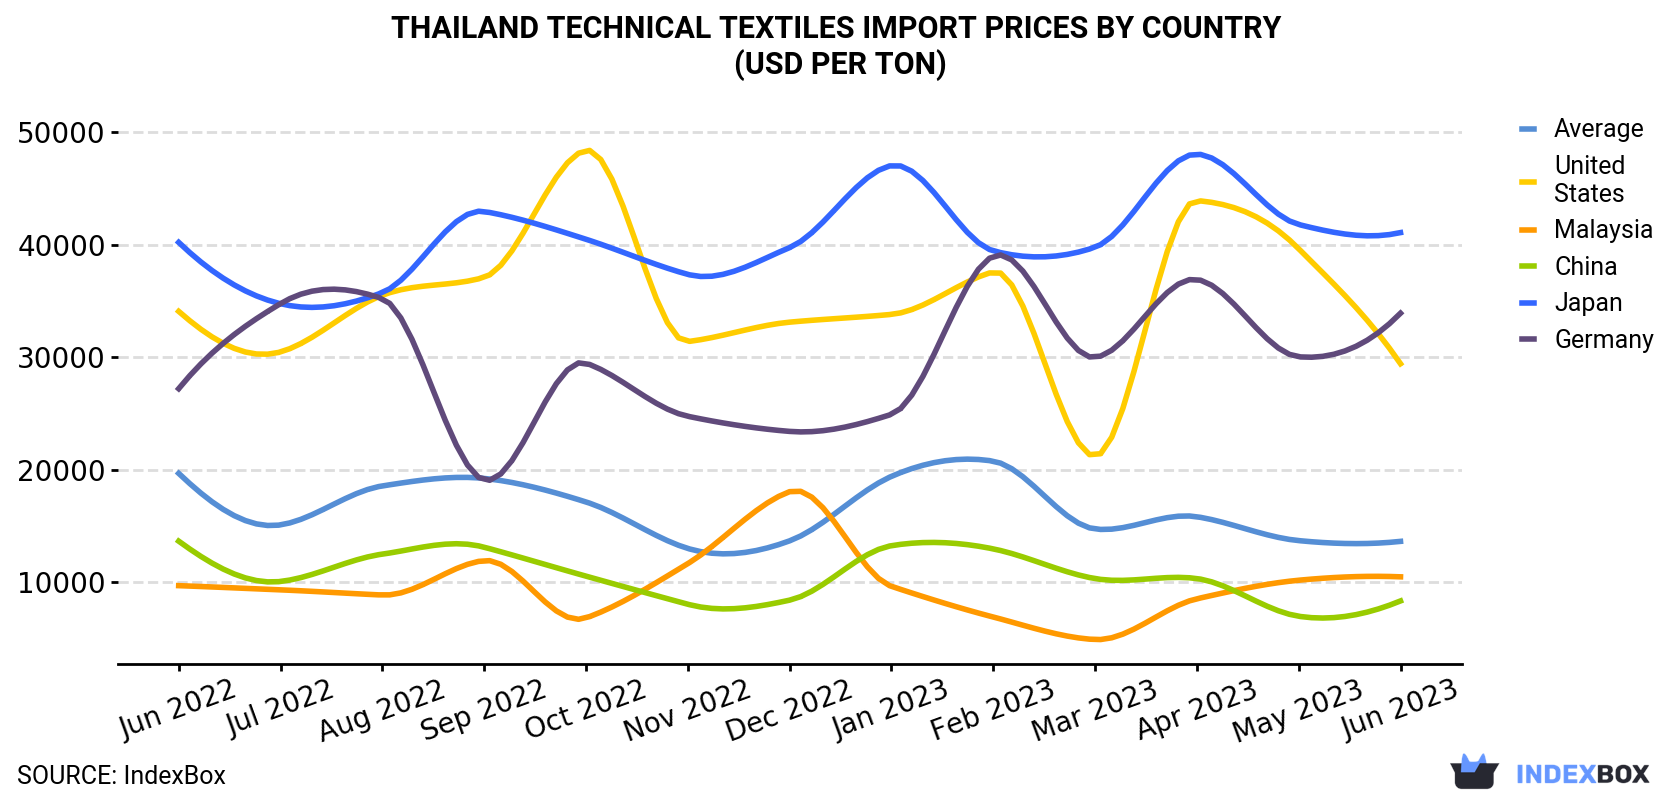 Thailand Technical Textiles Import Prices By Country (USD Per Ton)